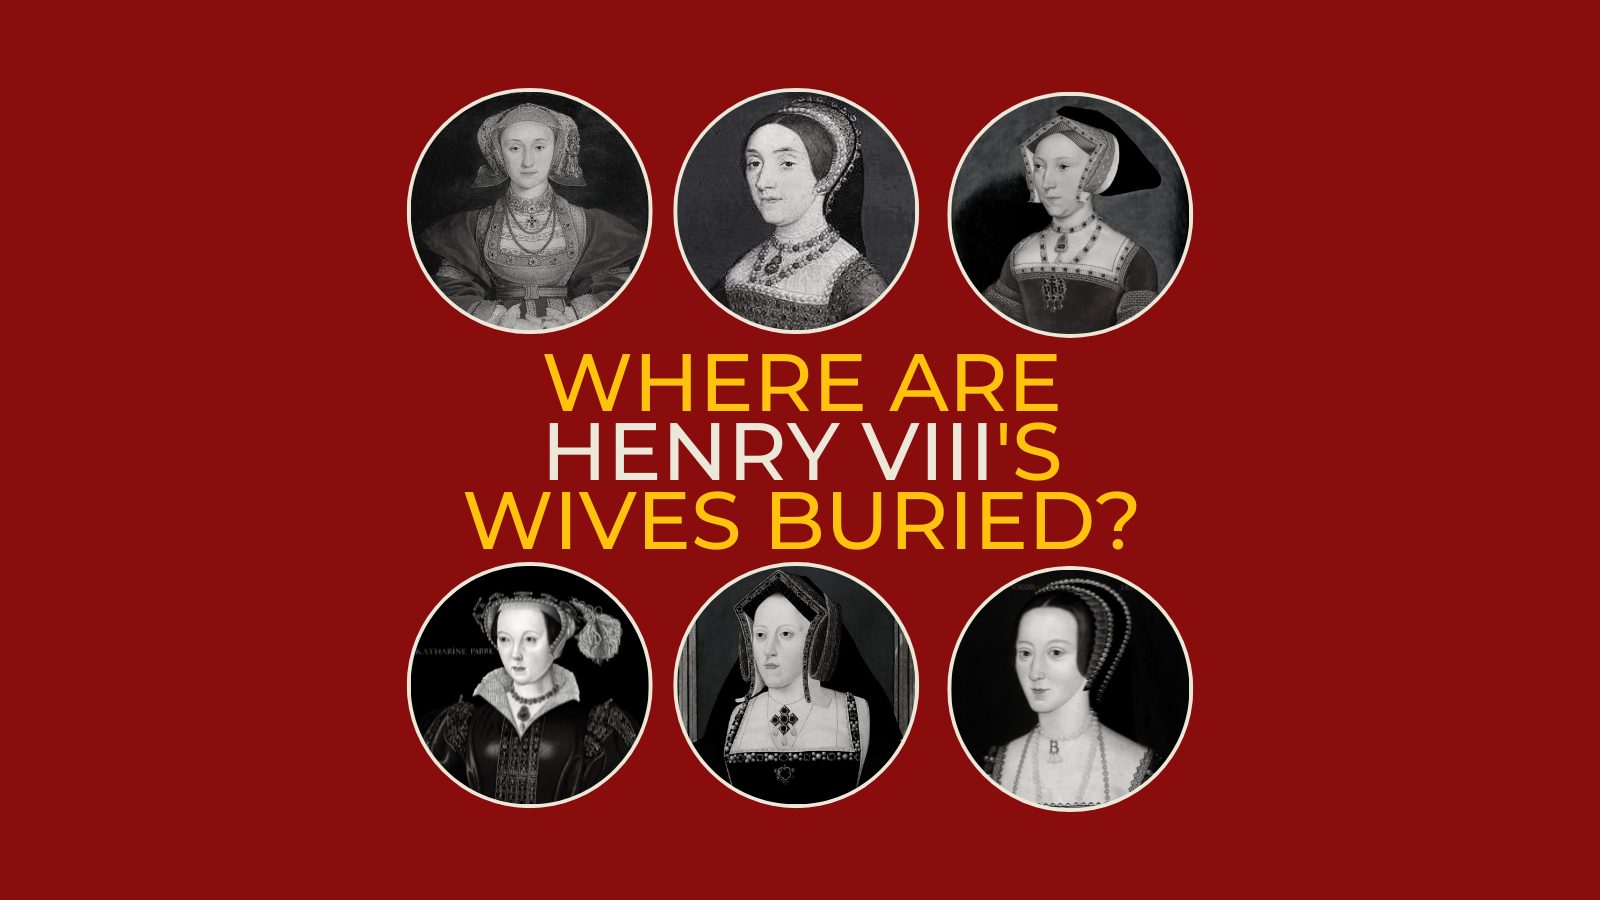 Where are Henry VIII's wives buried